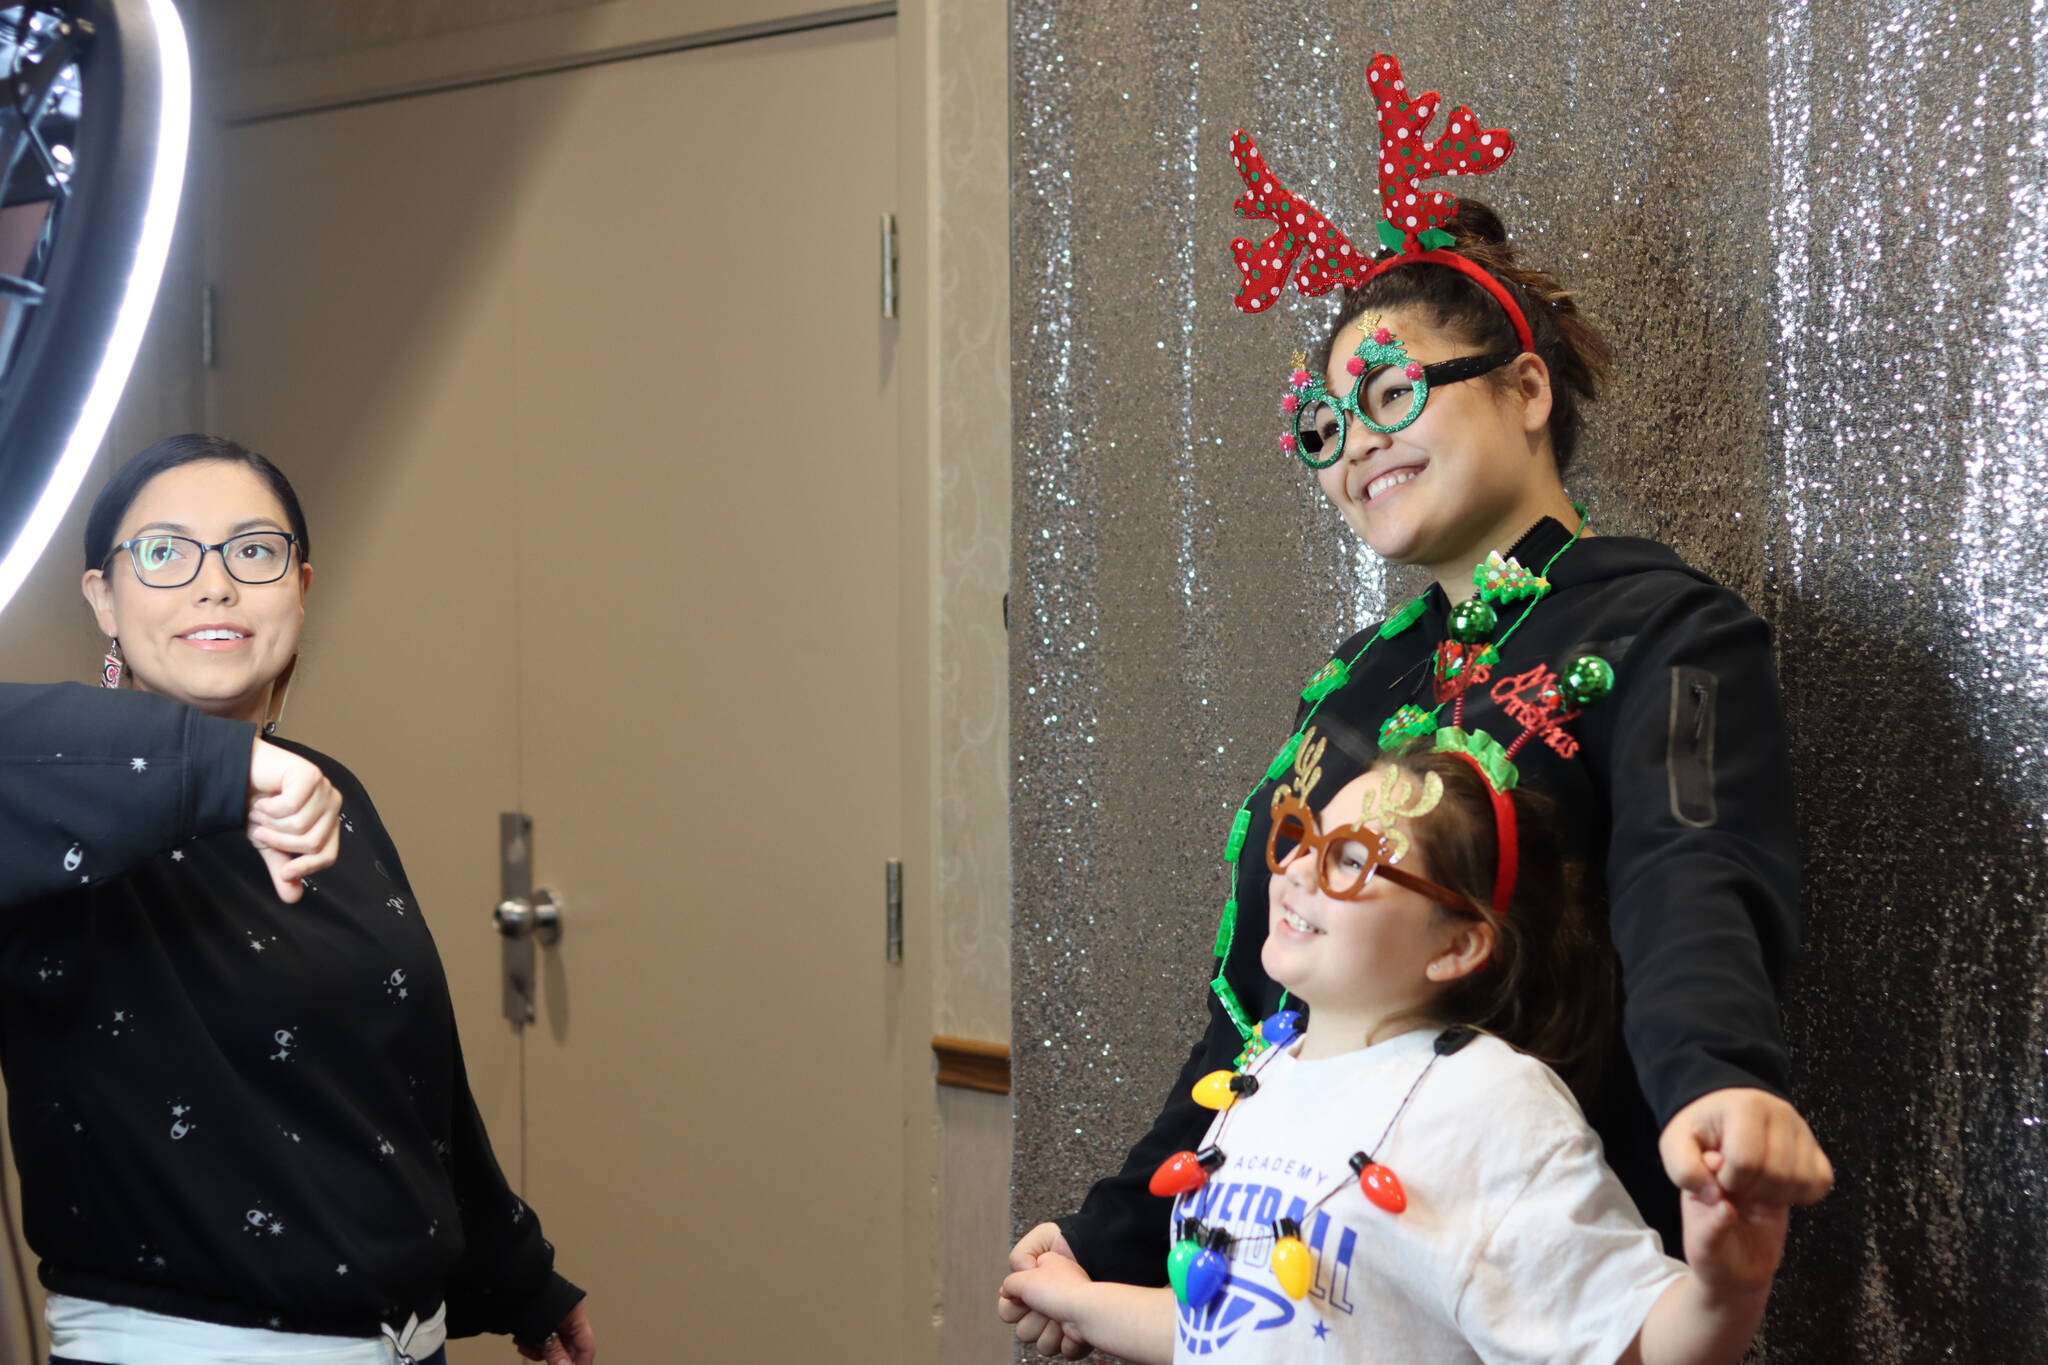 Tlingit and Haida volunteer Vanessa Allen helps young Dylann Wilson and Penina Fenumiai with the holiday photo booth set up during the Indigenous Artists & Vendors Holiday Market at the Elizabeth Peratrovich Hall on Friday. (Jonson Kuhn / Juneau Empire)